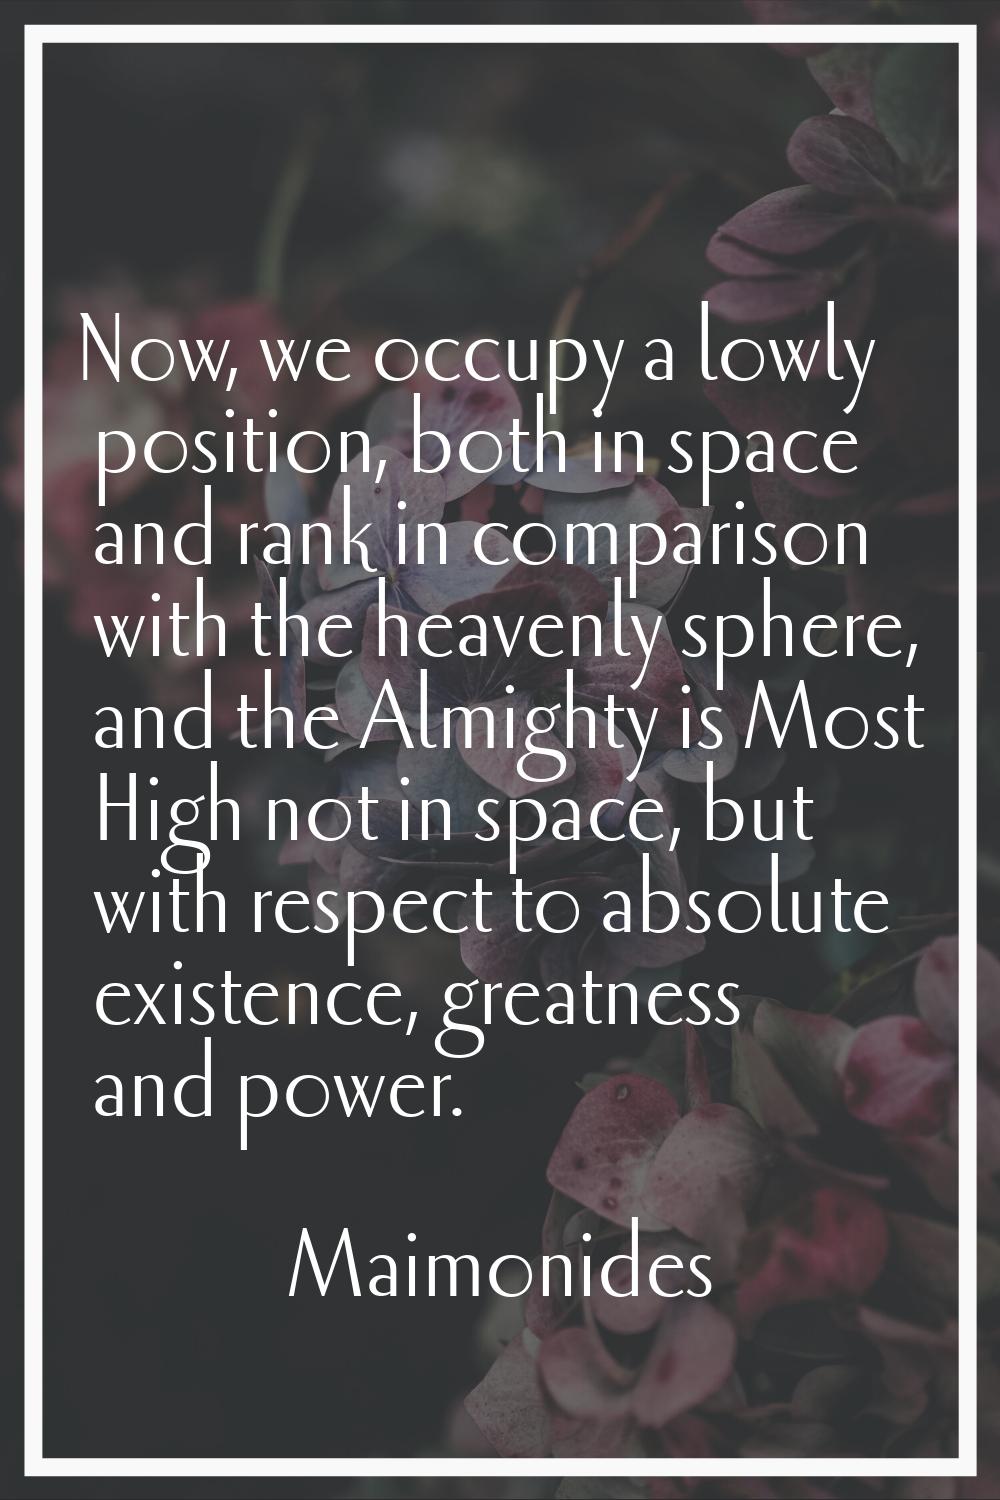 Now, we occupy a lowly position, both in space and rank in comparison with the heavenly sphere, and